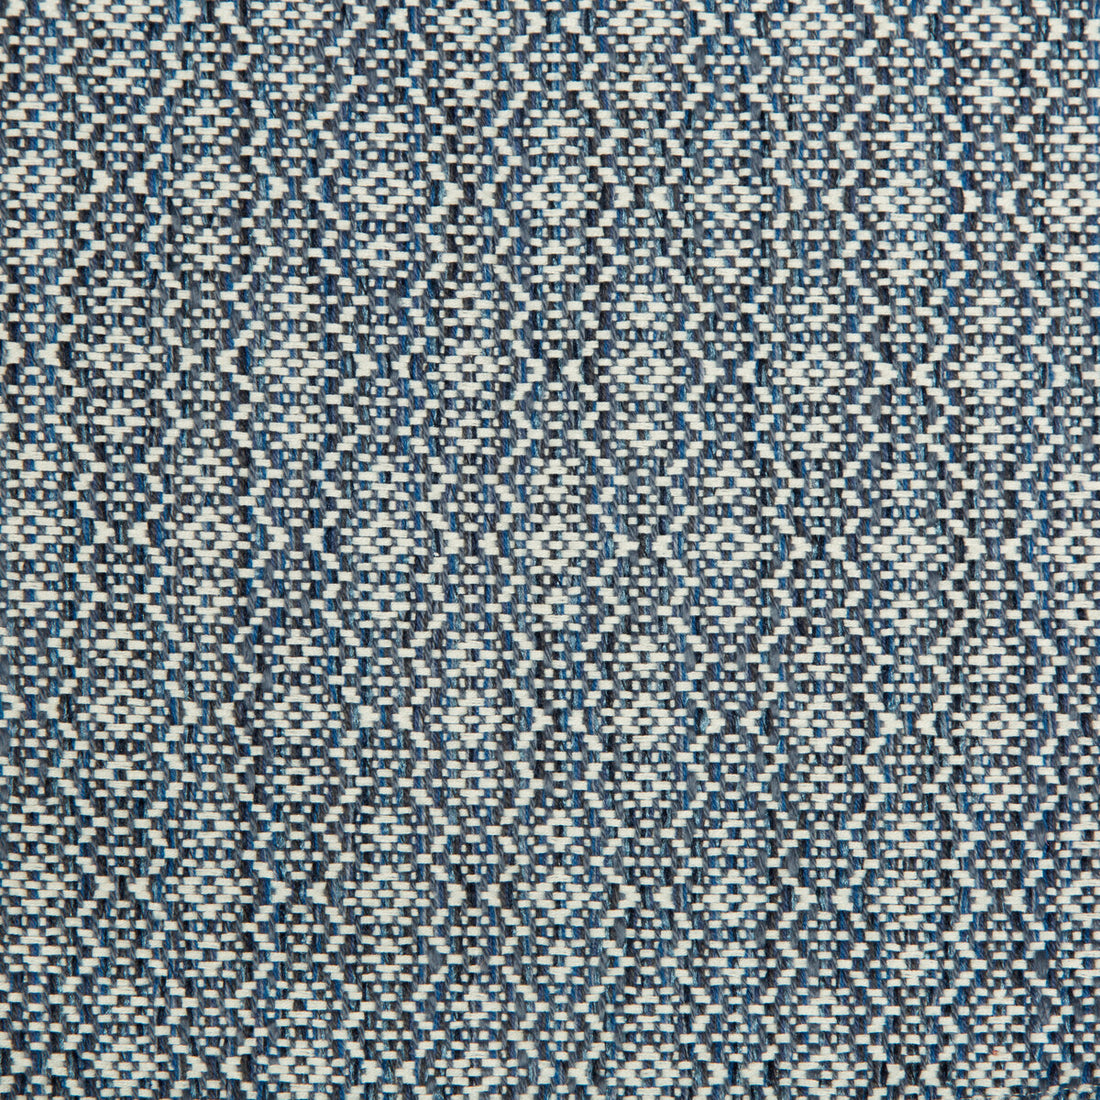 Kravet Smart fabric in 34625-515 color - pattern 34625.515.0 - by Kravet Smart in the Performance Crypton Home collection